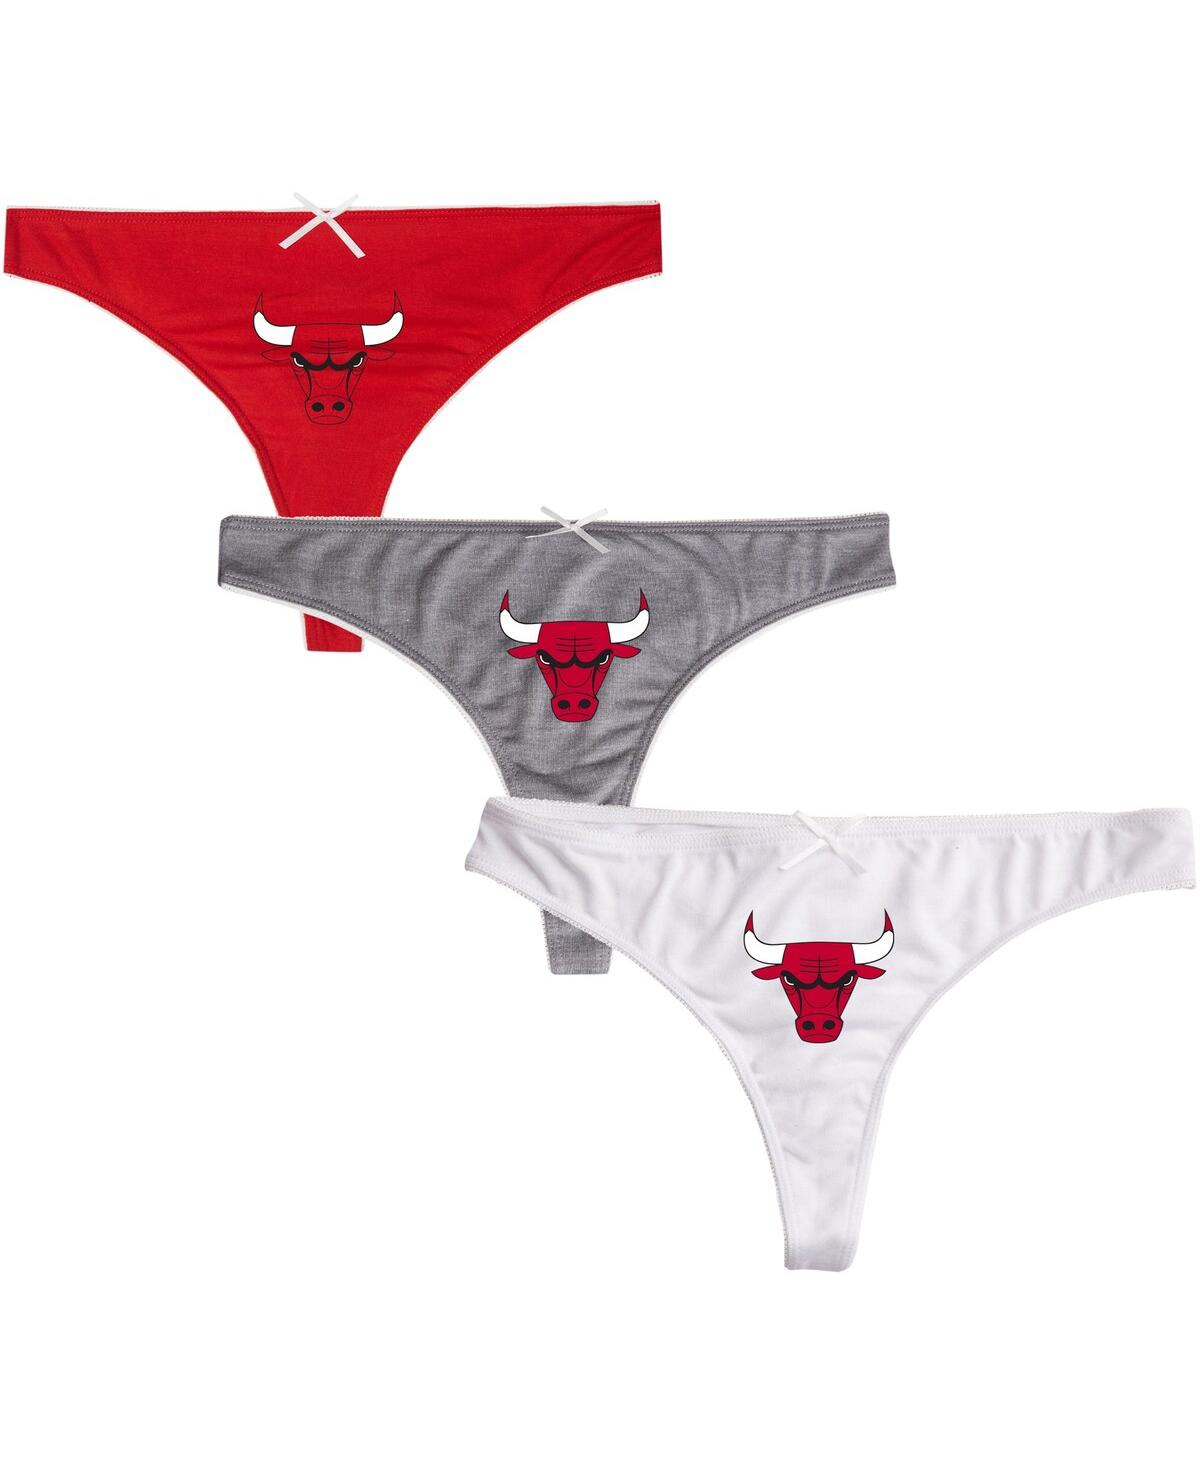 Women's College Concepts Red, Charcoal, White Chicago Bulls Arctic 3-Pack Thong Set - Red, Charcoal